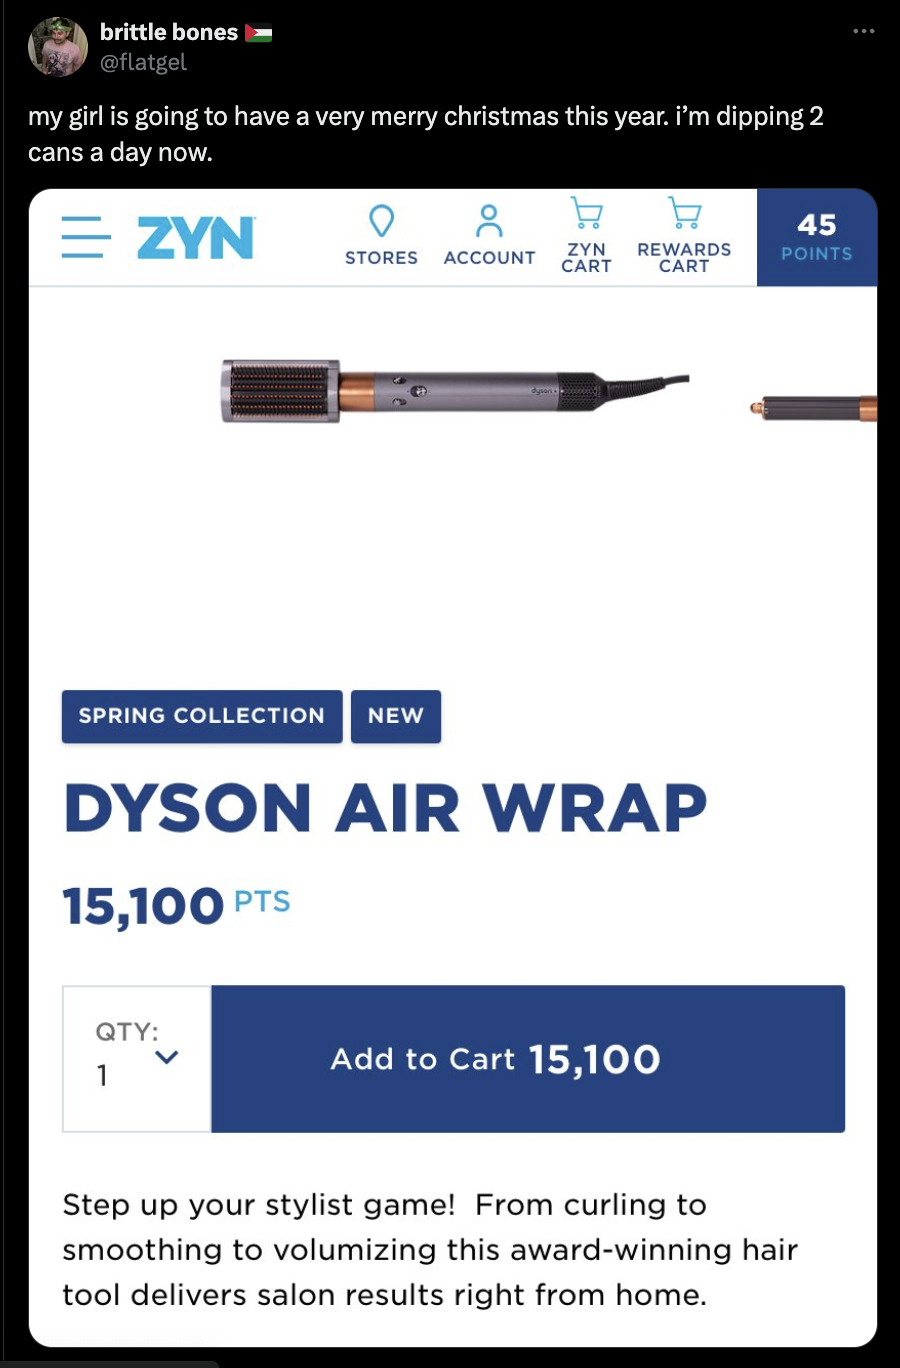 screenshot - brittle bones in my girl is going to have a very merry christmas this year. I'm dipping 2 cans a day now. Zyn W W Stores Account Zyn Rewards Cart Cart 45 Points Spring Collection New Dyson Air Wrap 15,100 Pts Qty 1 Add to Cart 15,100 Step up 